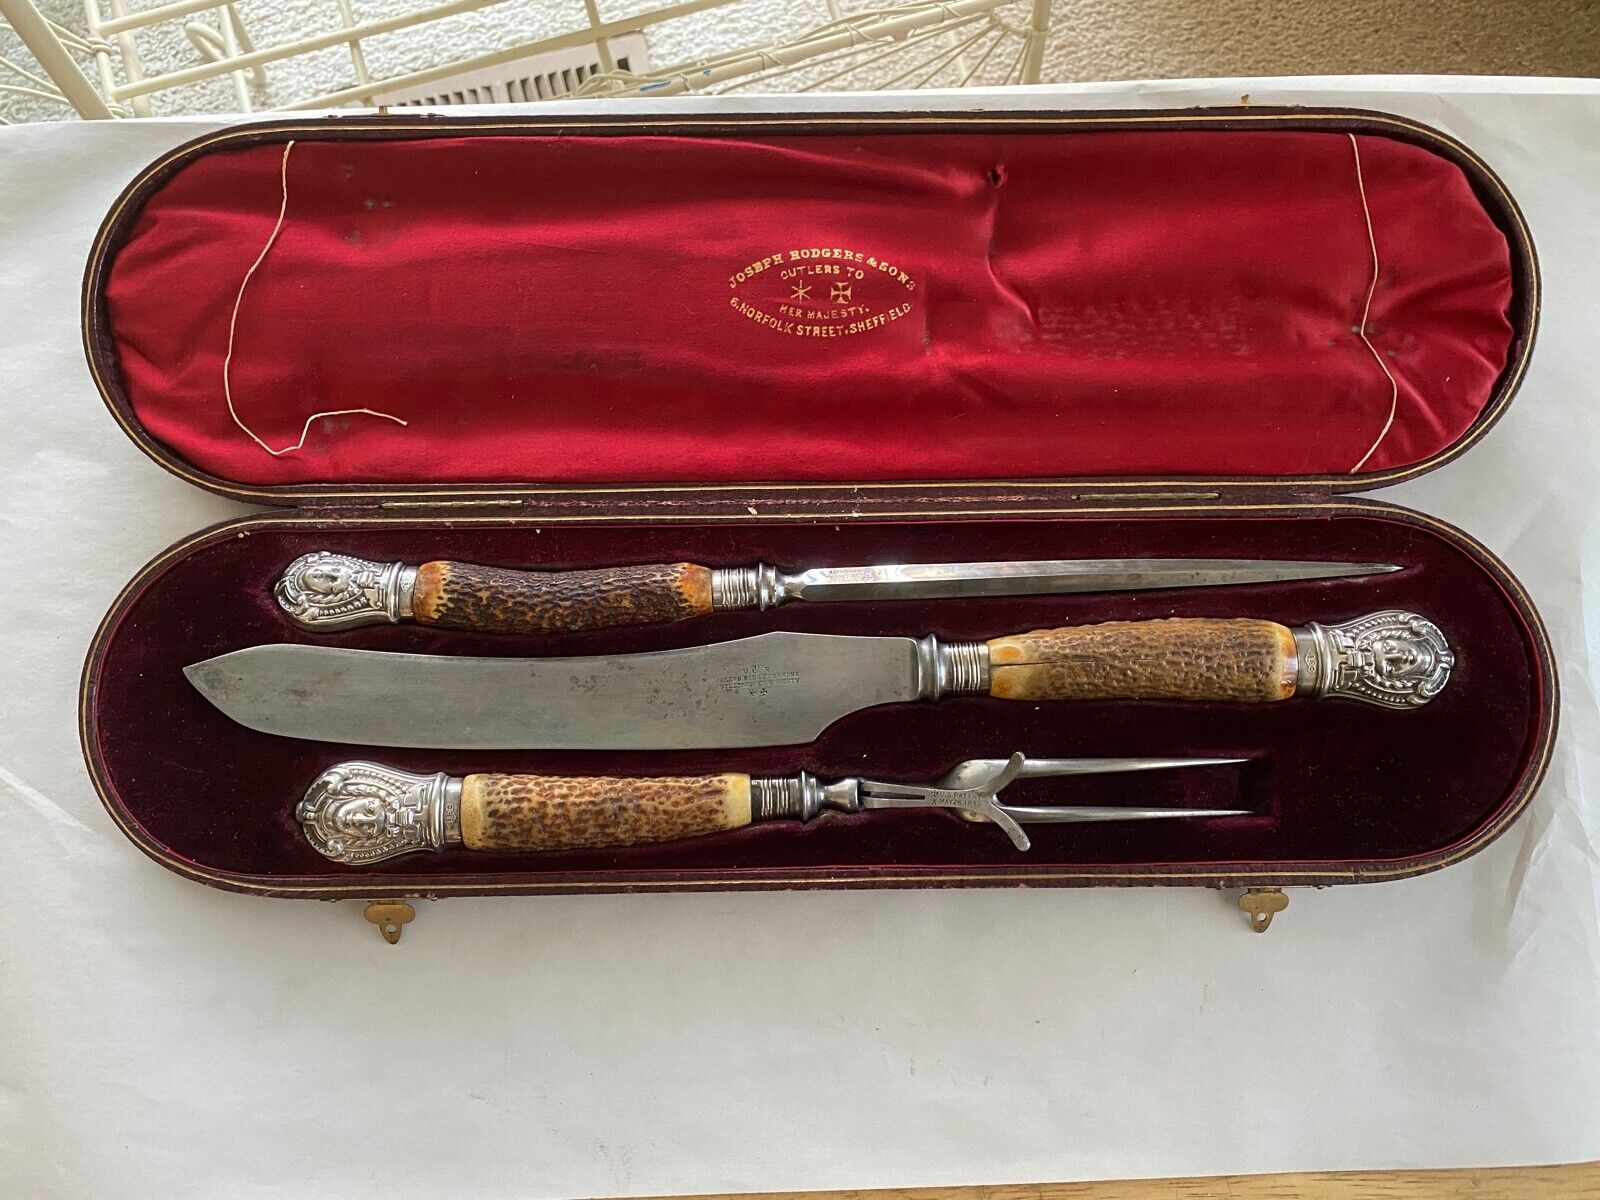 Antique Victorian Joseph Rodgers & Sons 3 Piece Carving Set with Box - Pre 1901